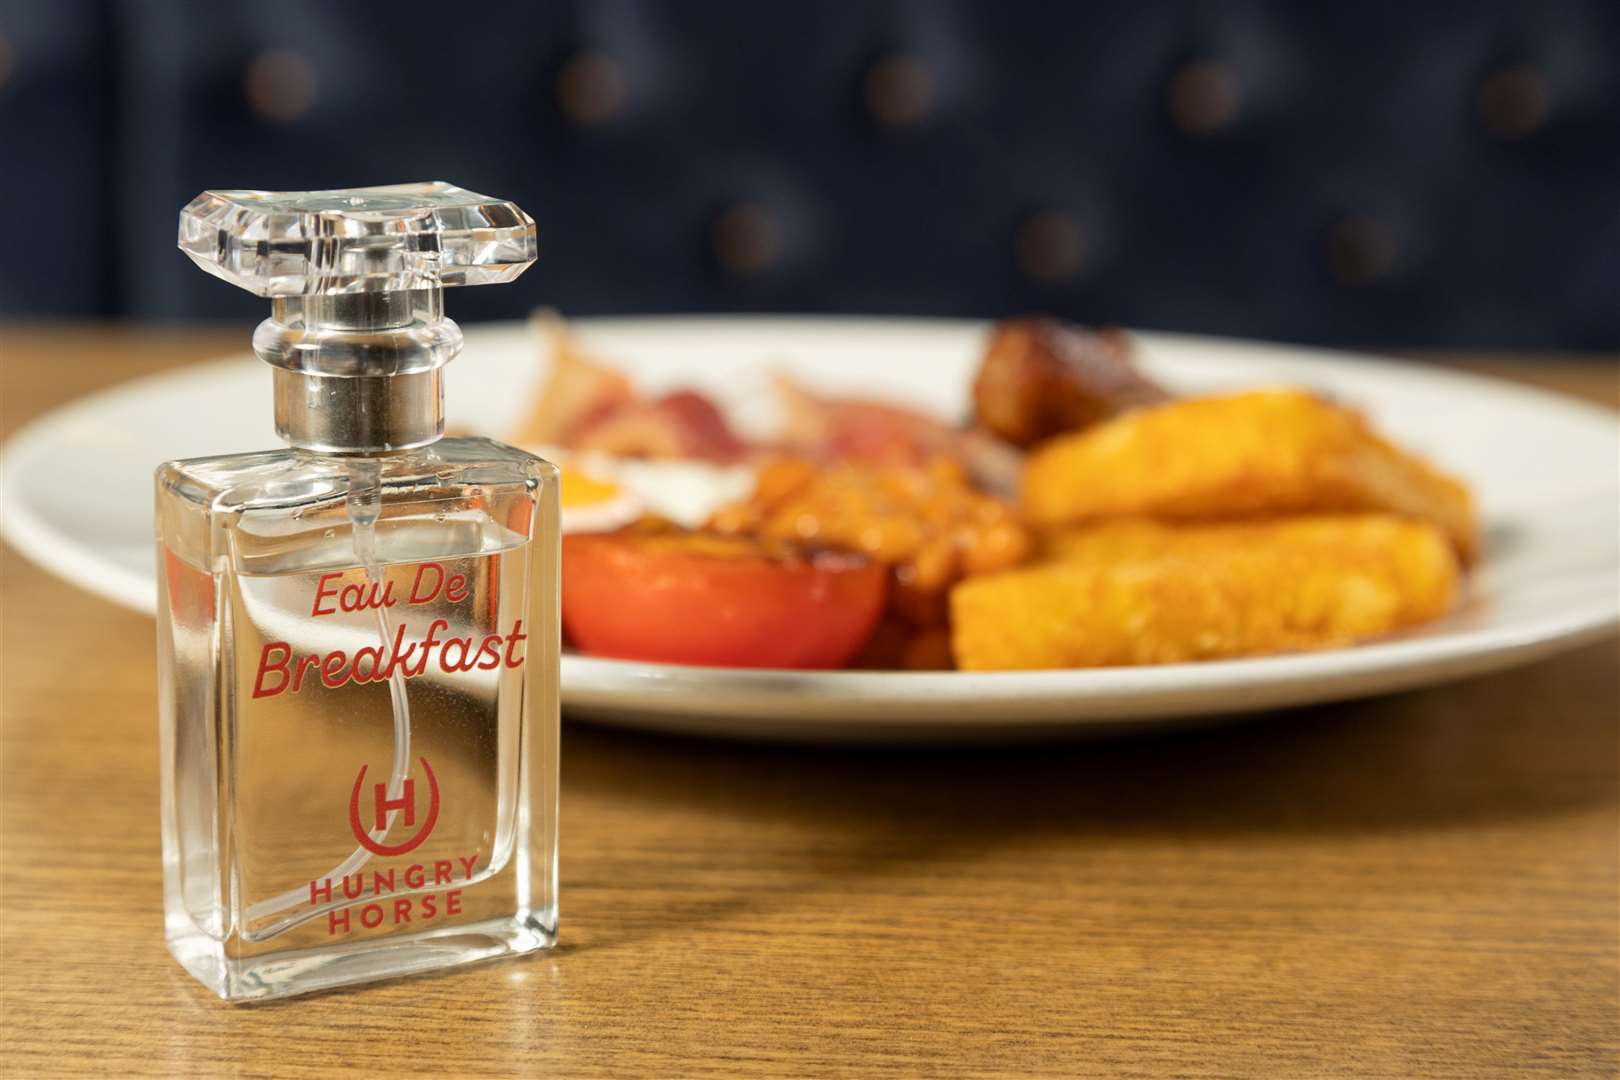 Hungry Horse launched a new breakfast menu in May and with it the world’s first full English breakfast scented fragrance